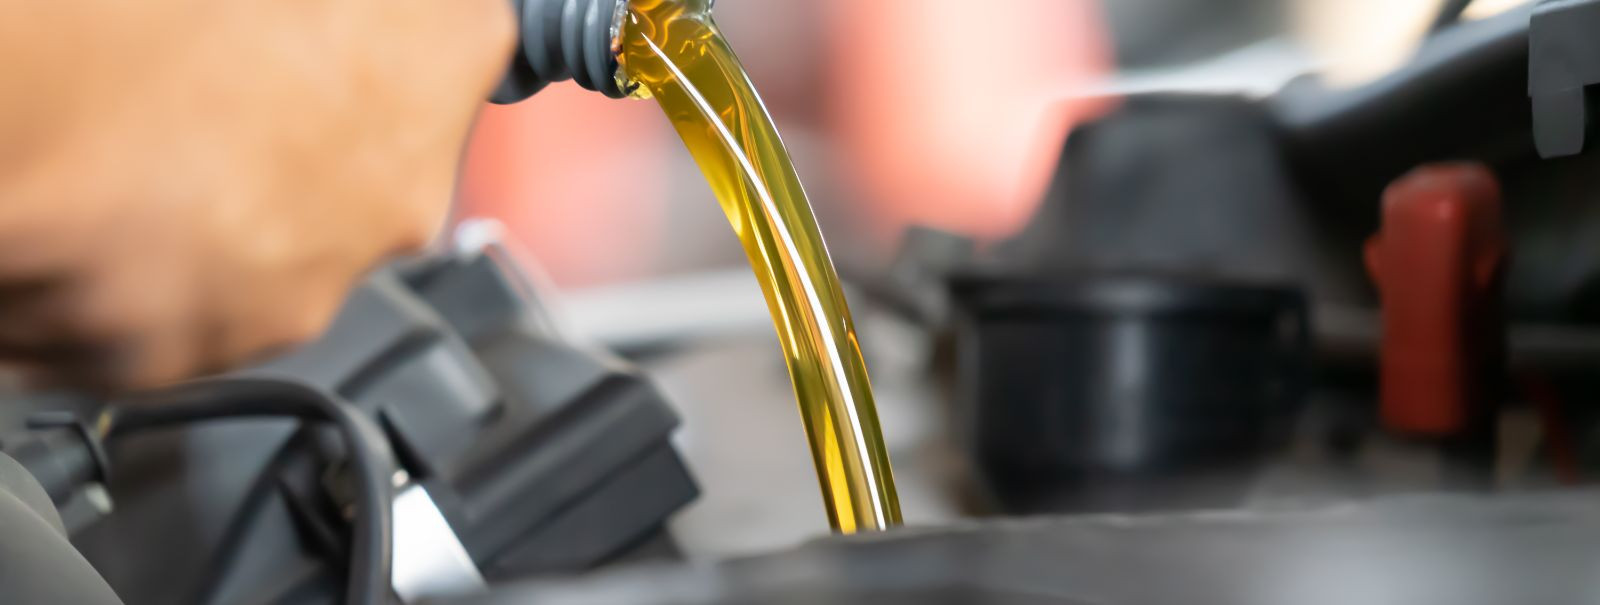 Engine oil is the lifeblood of any vehicle. It lubricates moving parts, reduces friction, prevents corrosion, and helps to keep the engine cool. Choosing the ri